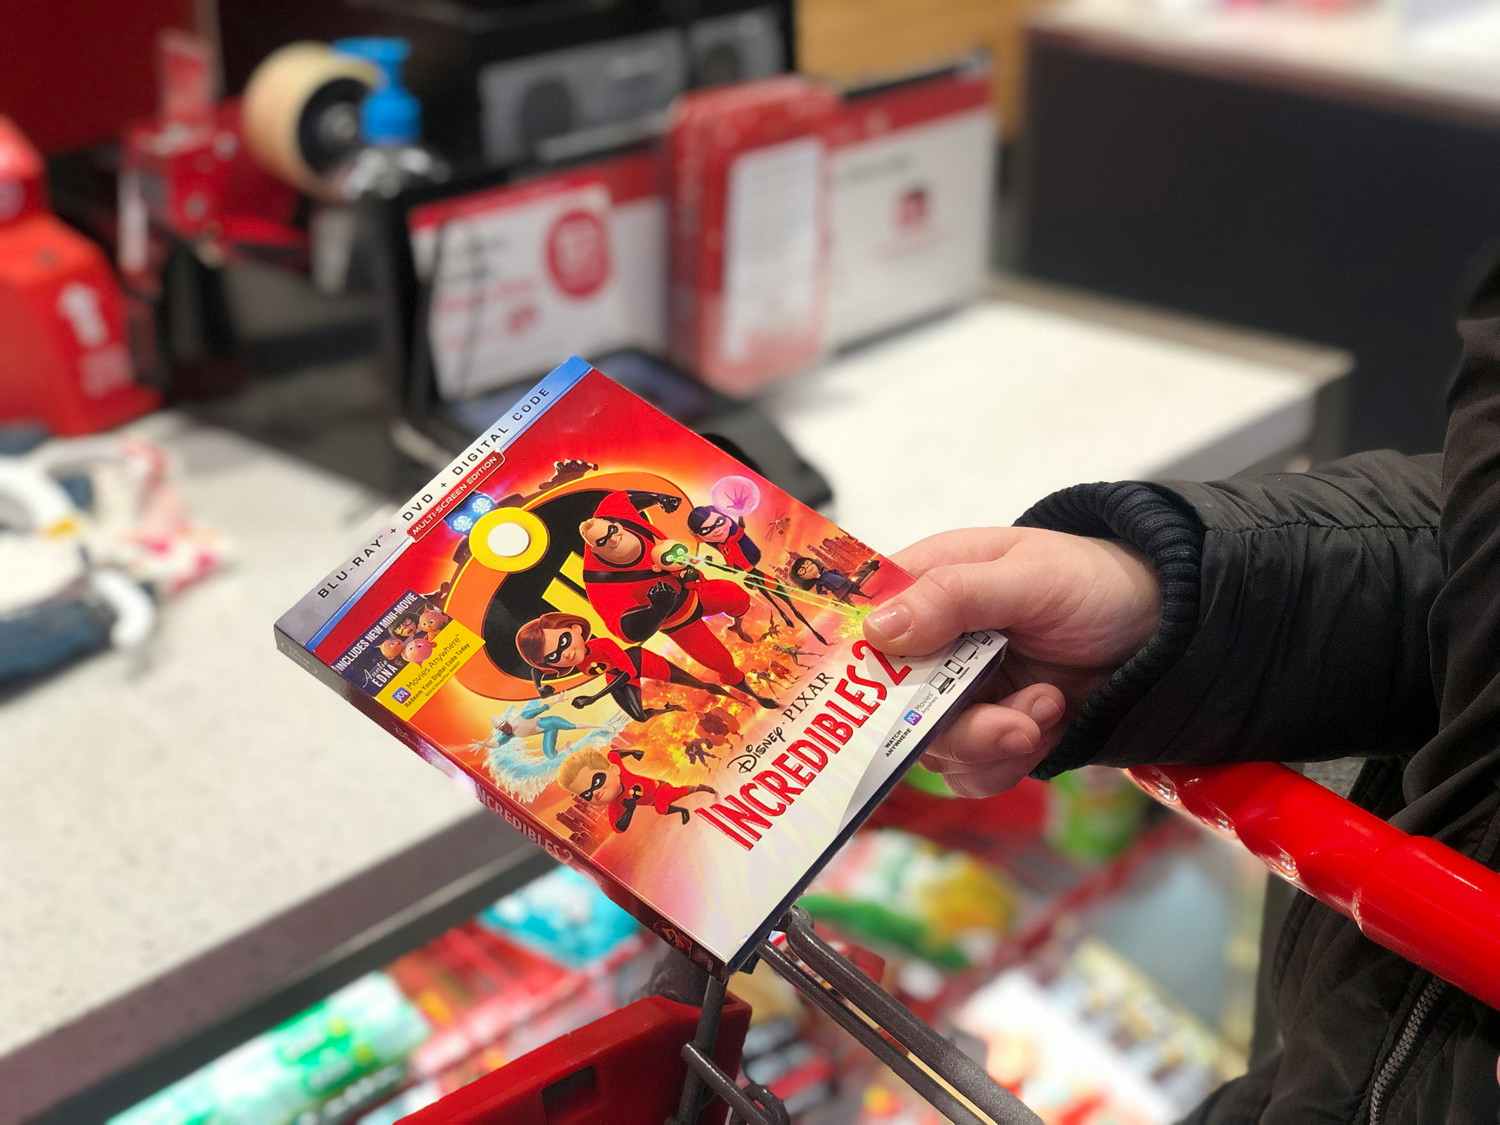 A person's hand holding a DVD case for Incredibles 2 above a Target shopping cart at the return counter at Target.